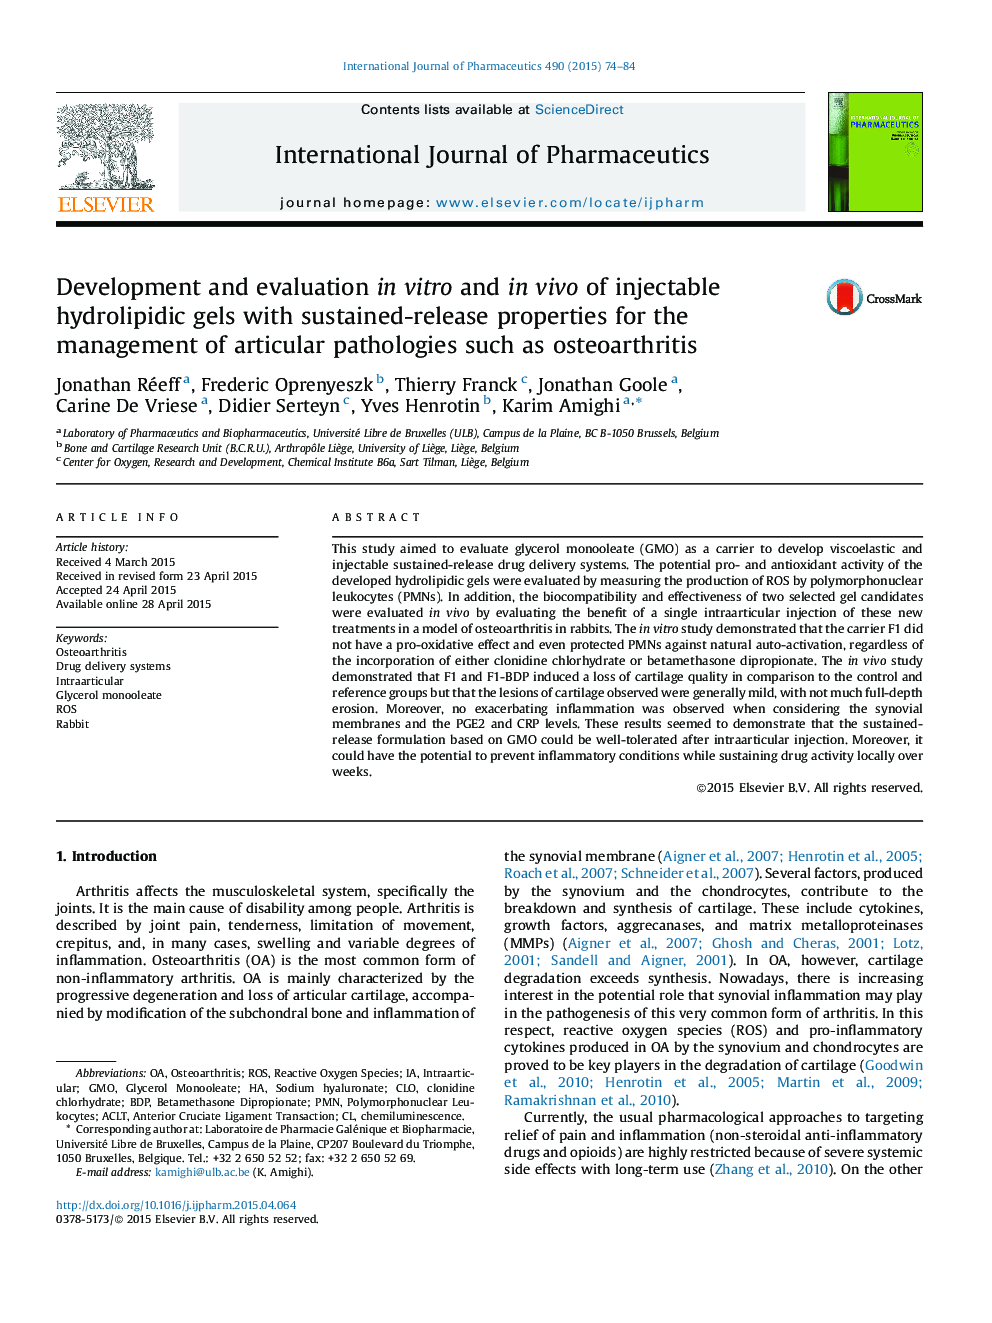 Development and evaluation in vitro and in vivo of injectable hydrolipidic gels with sustained-release properties for the management of articular pathologies such as osteoarthritis